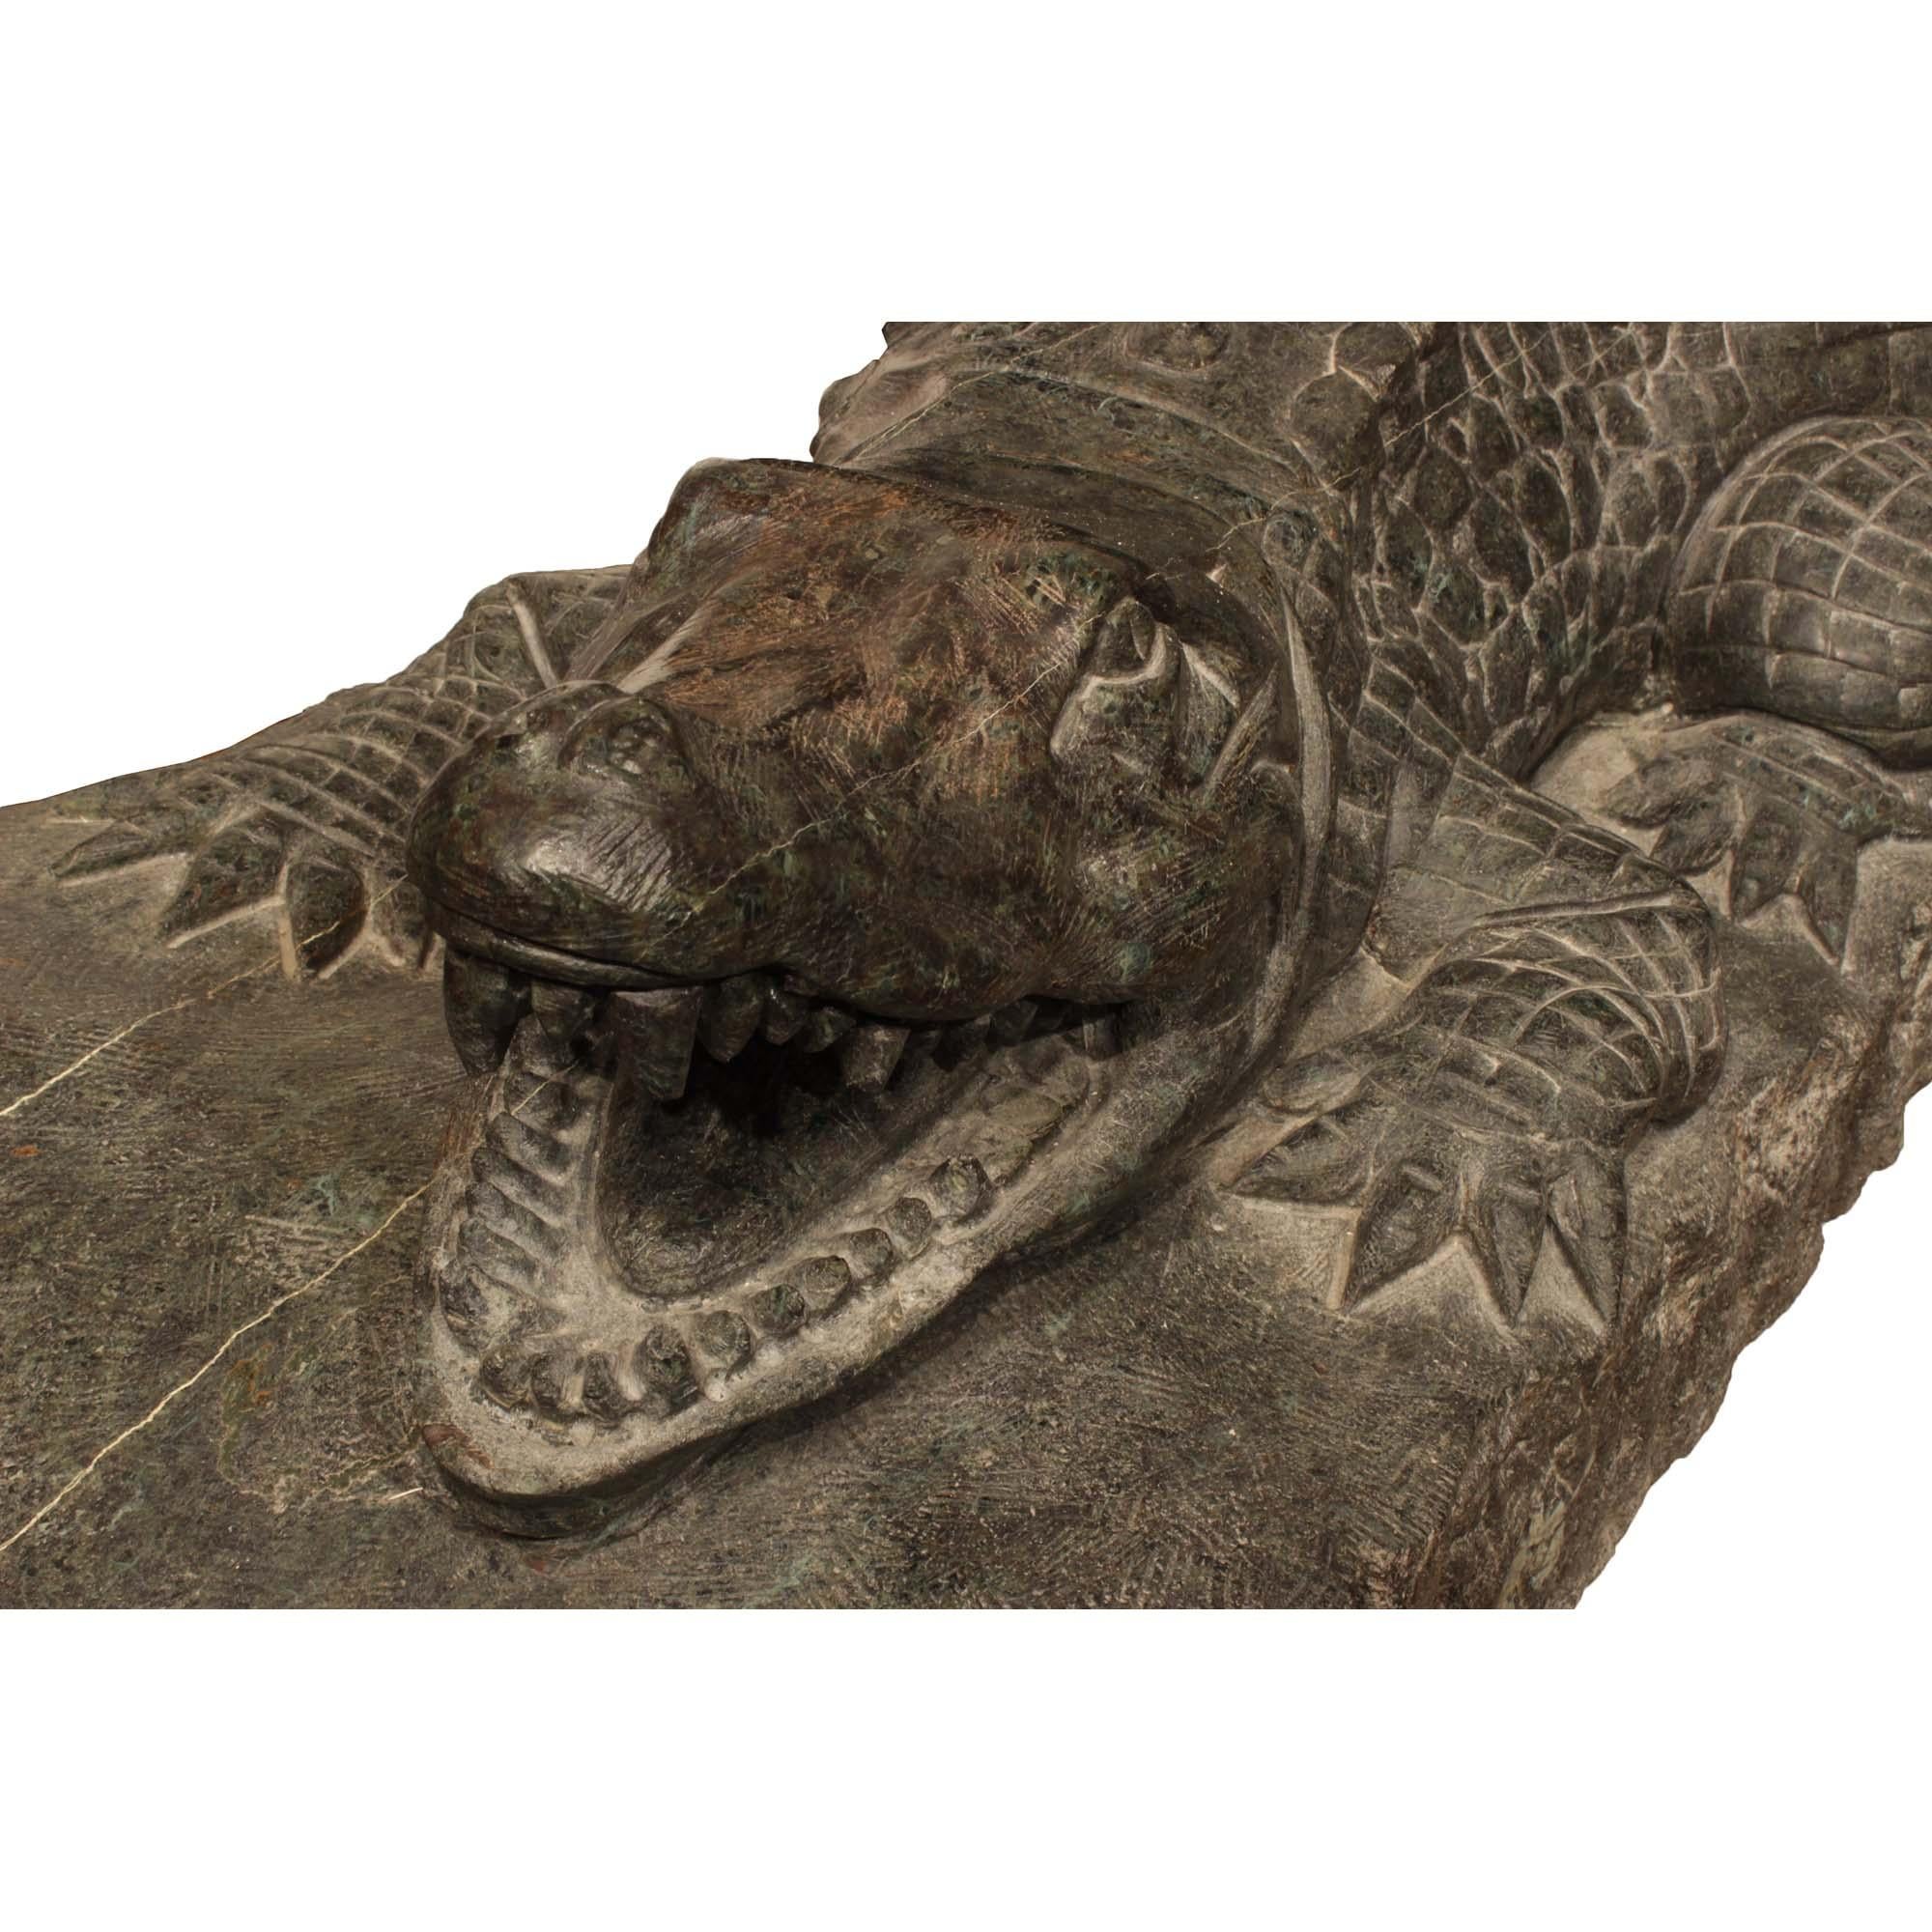 Italian 19th Century Verde Prato Marble Alligator Sculpture, from Florence In Good Condition For Sale In West Palm Beach, FL